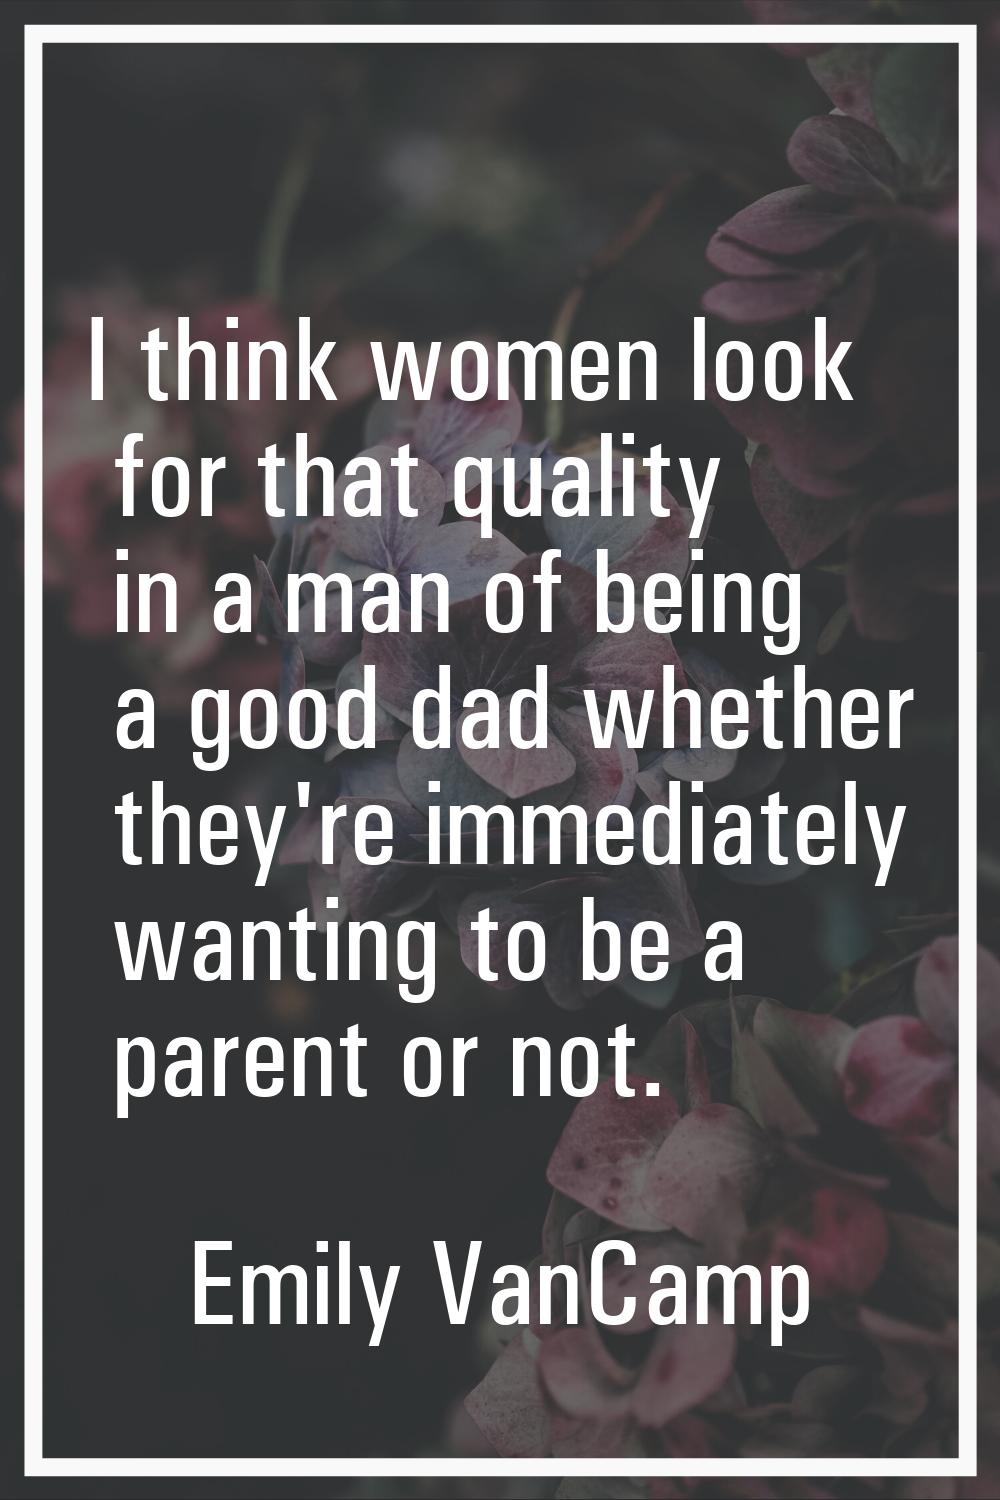 I think women look for that quality in a man of being a good dad whether they're immediately wantin